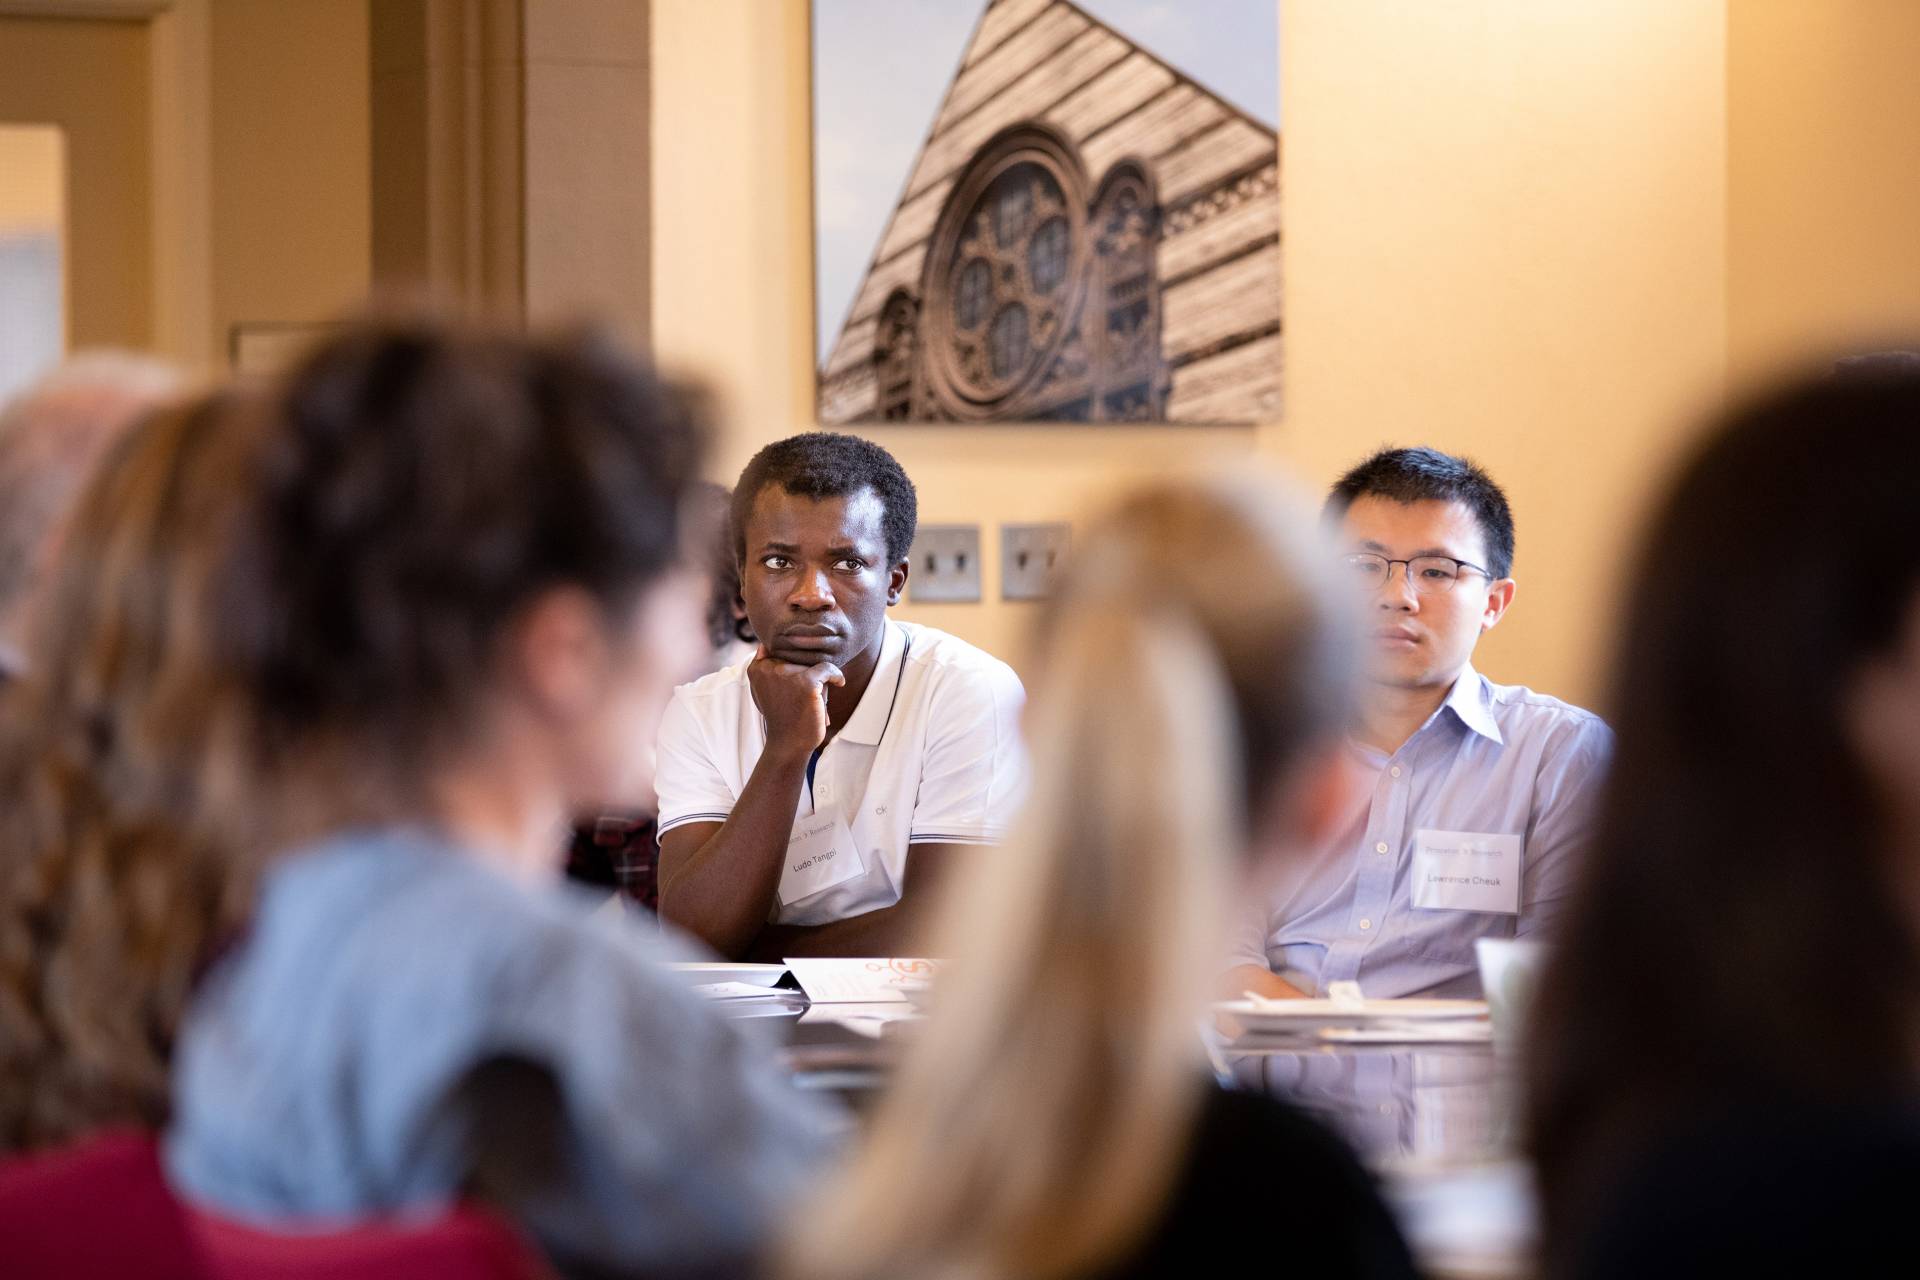 Faculty listen intently while sitting around a table